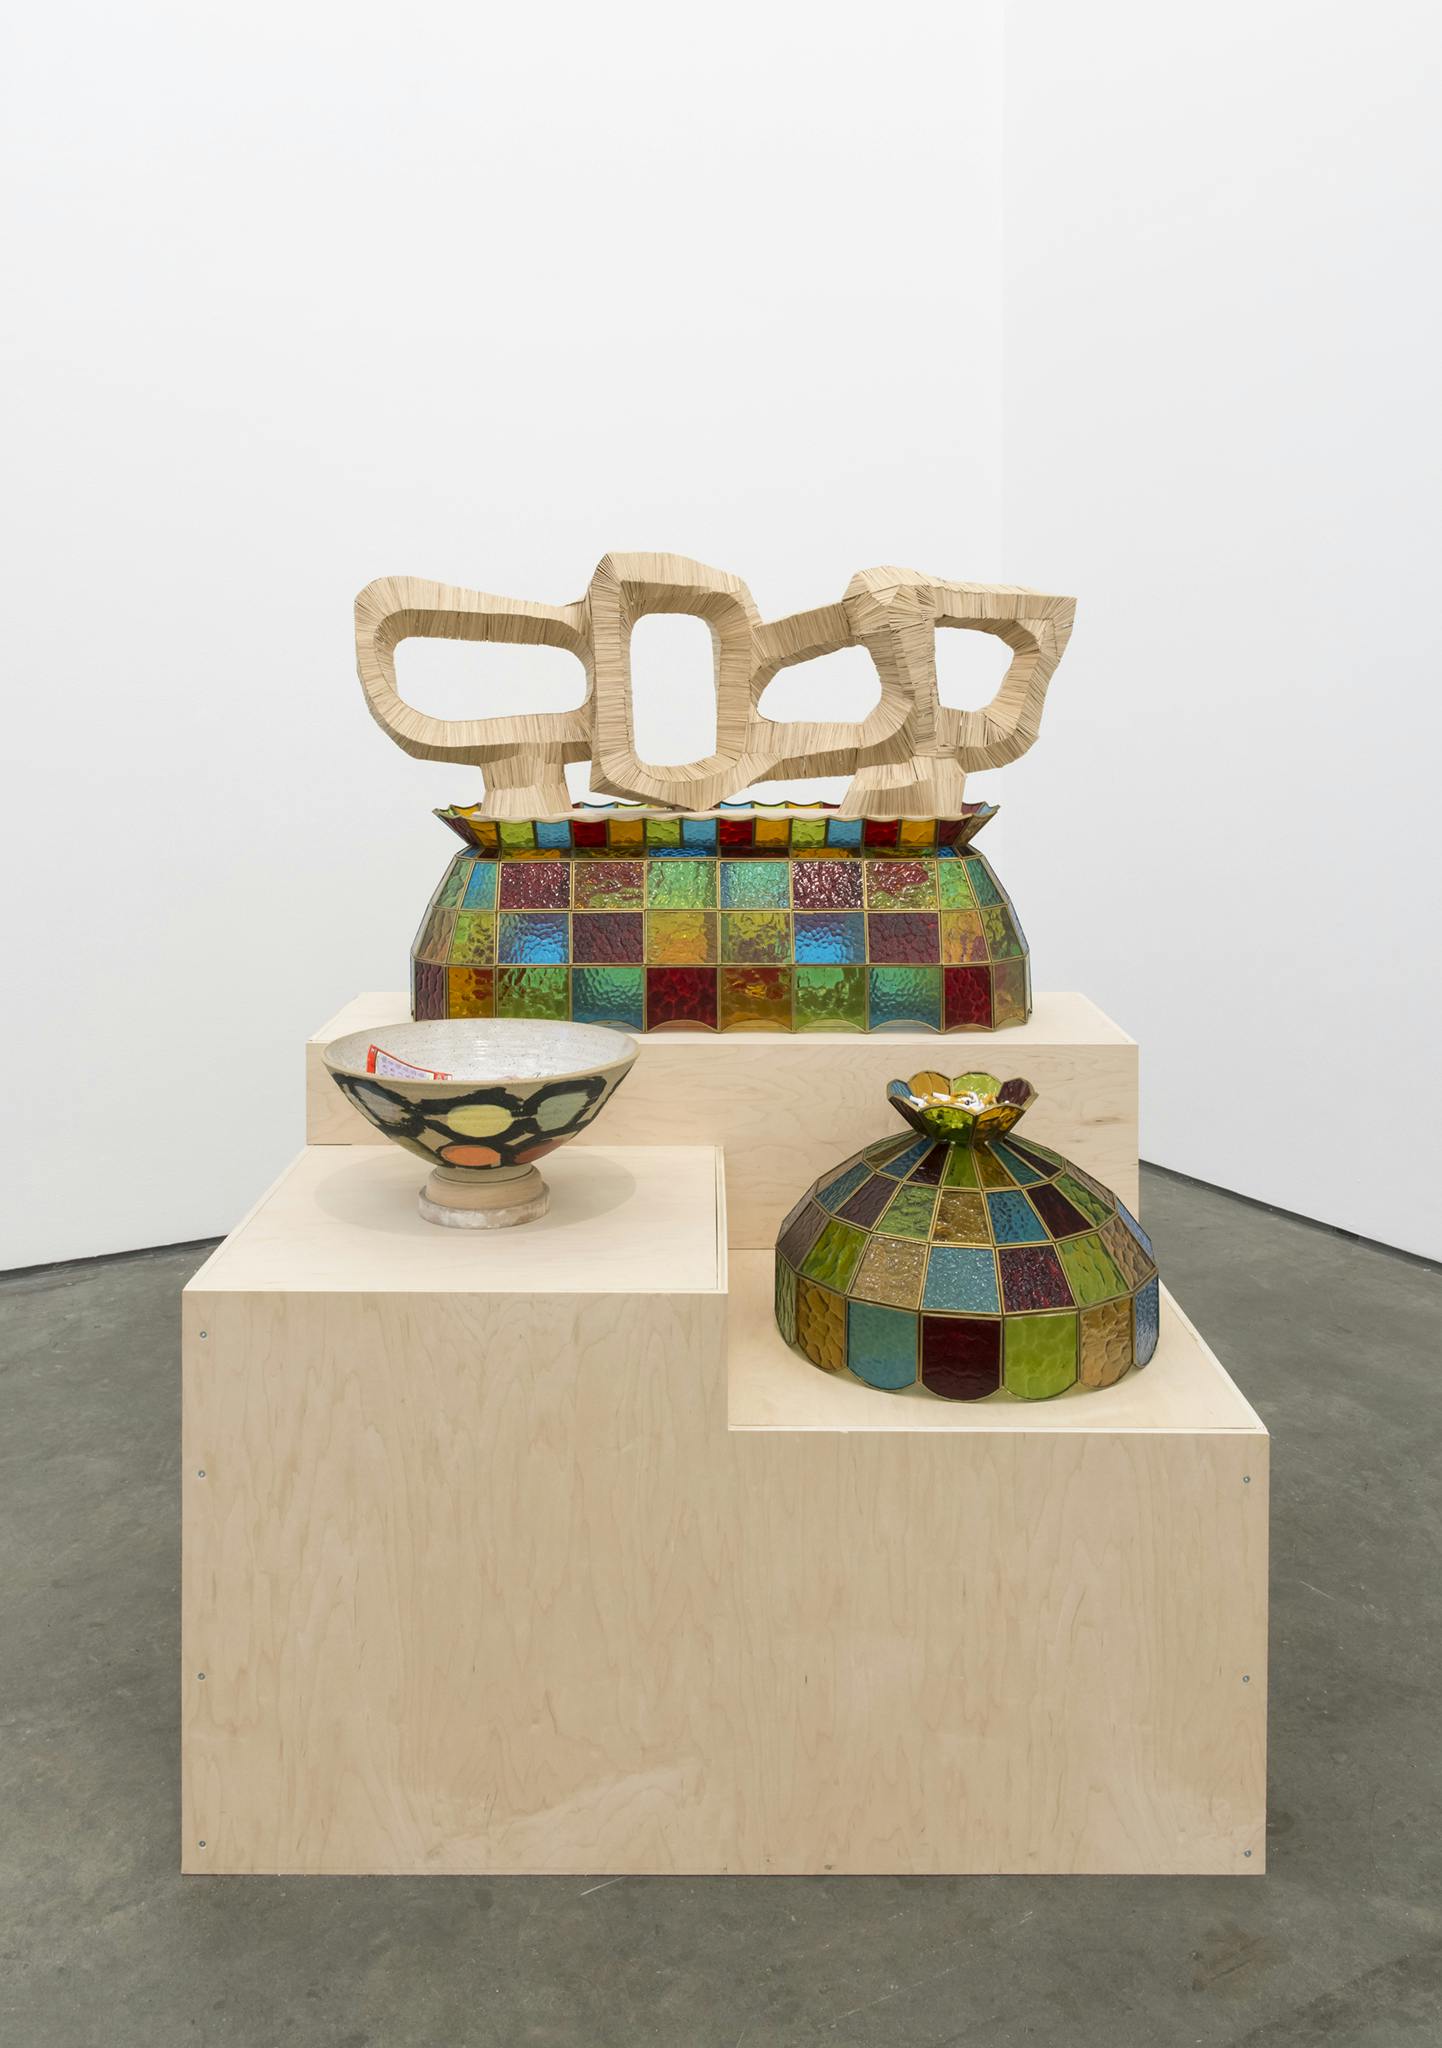 A ceramic bowl, wooden sculpture and two colourful glass lampshades sit on a three tier plinth made out of light wood.